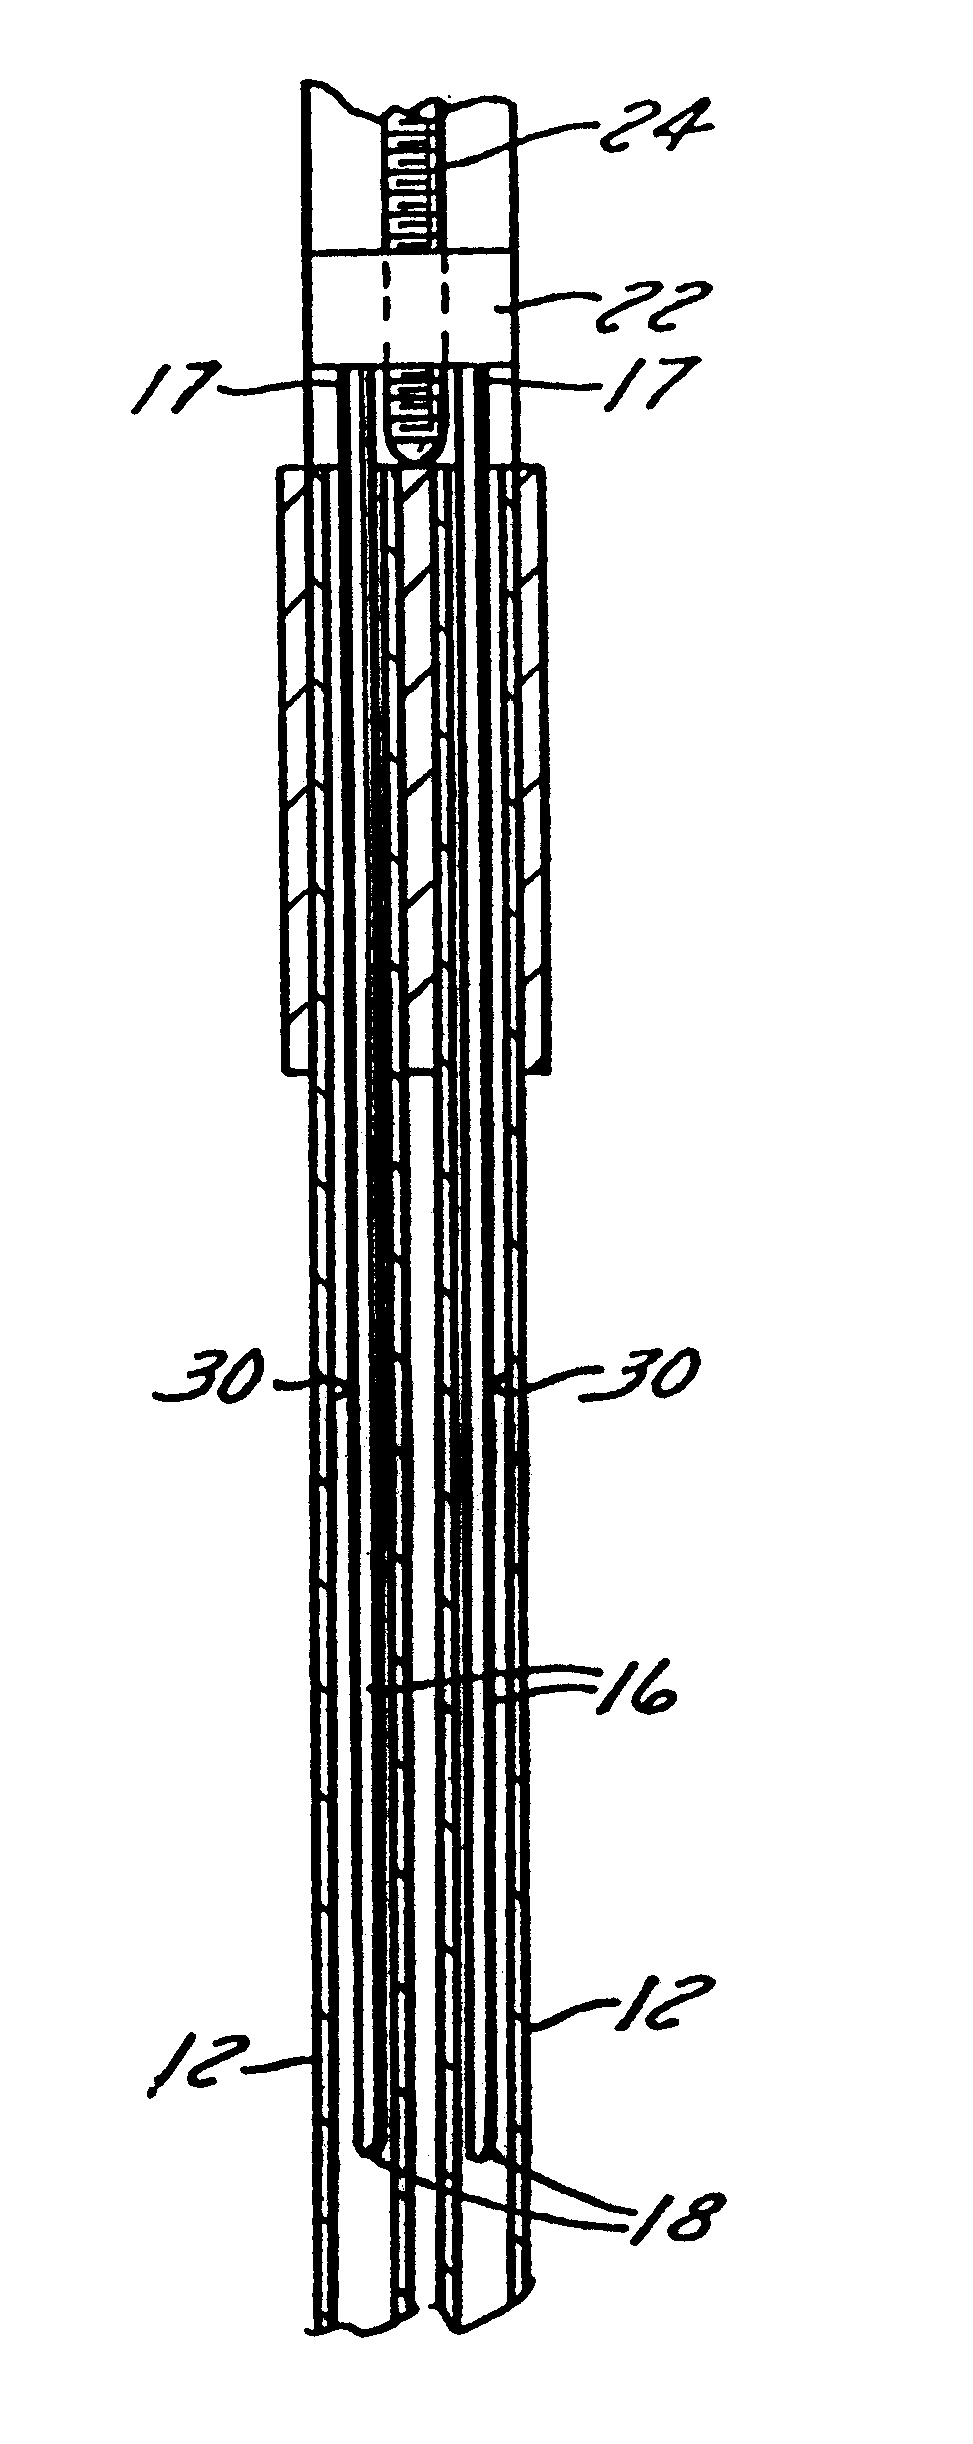 Variable pressure reducing device